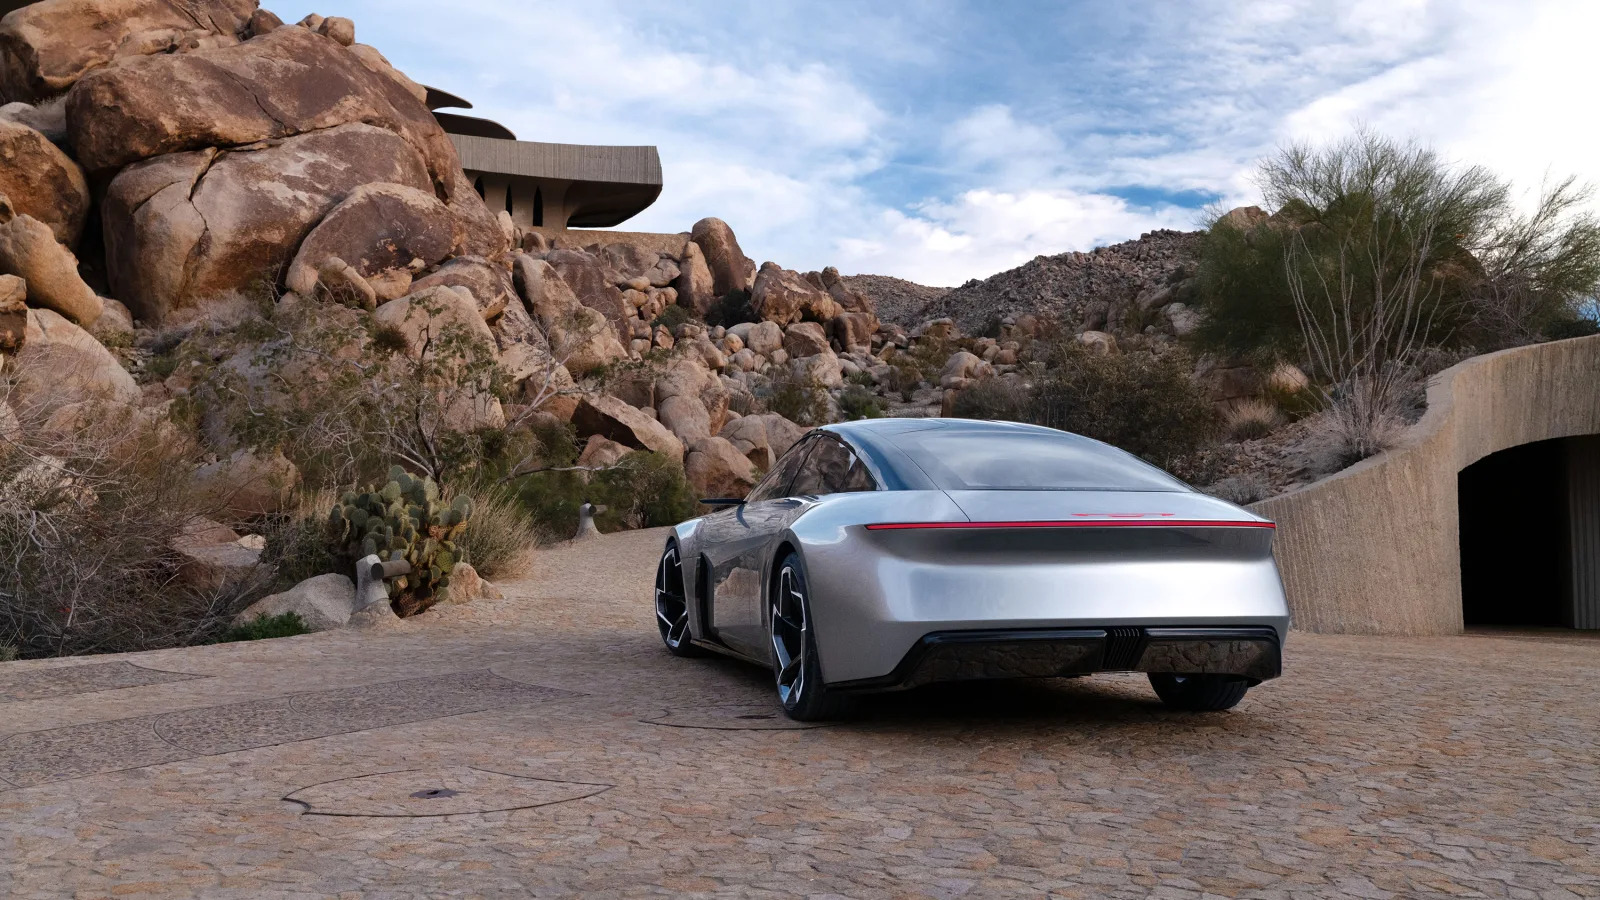 The rear of the Chrysler Halcyon concept also carries its own un